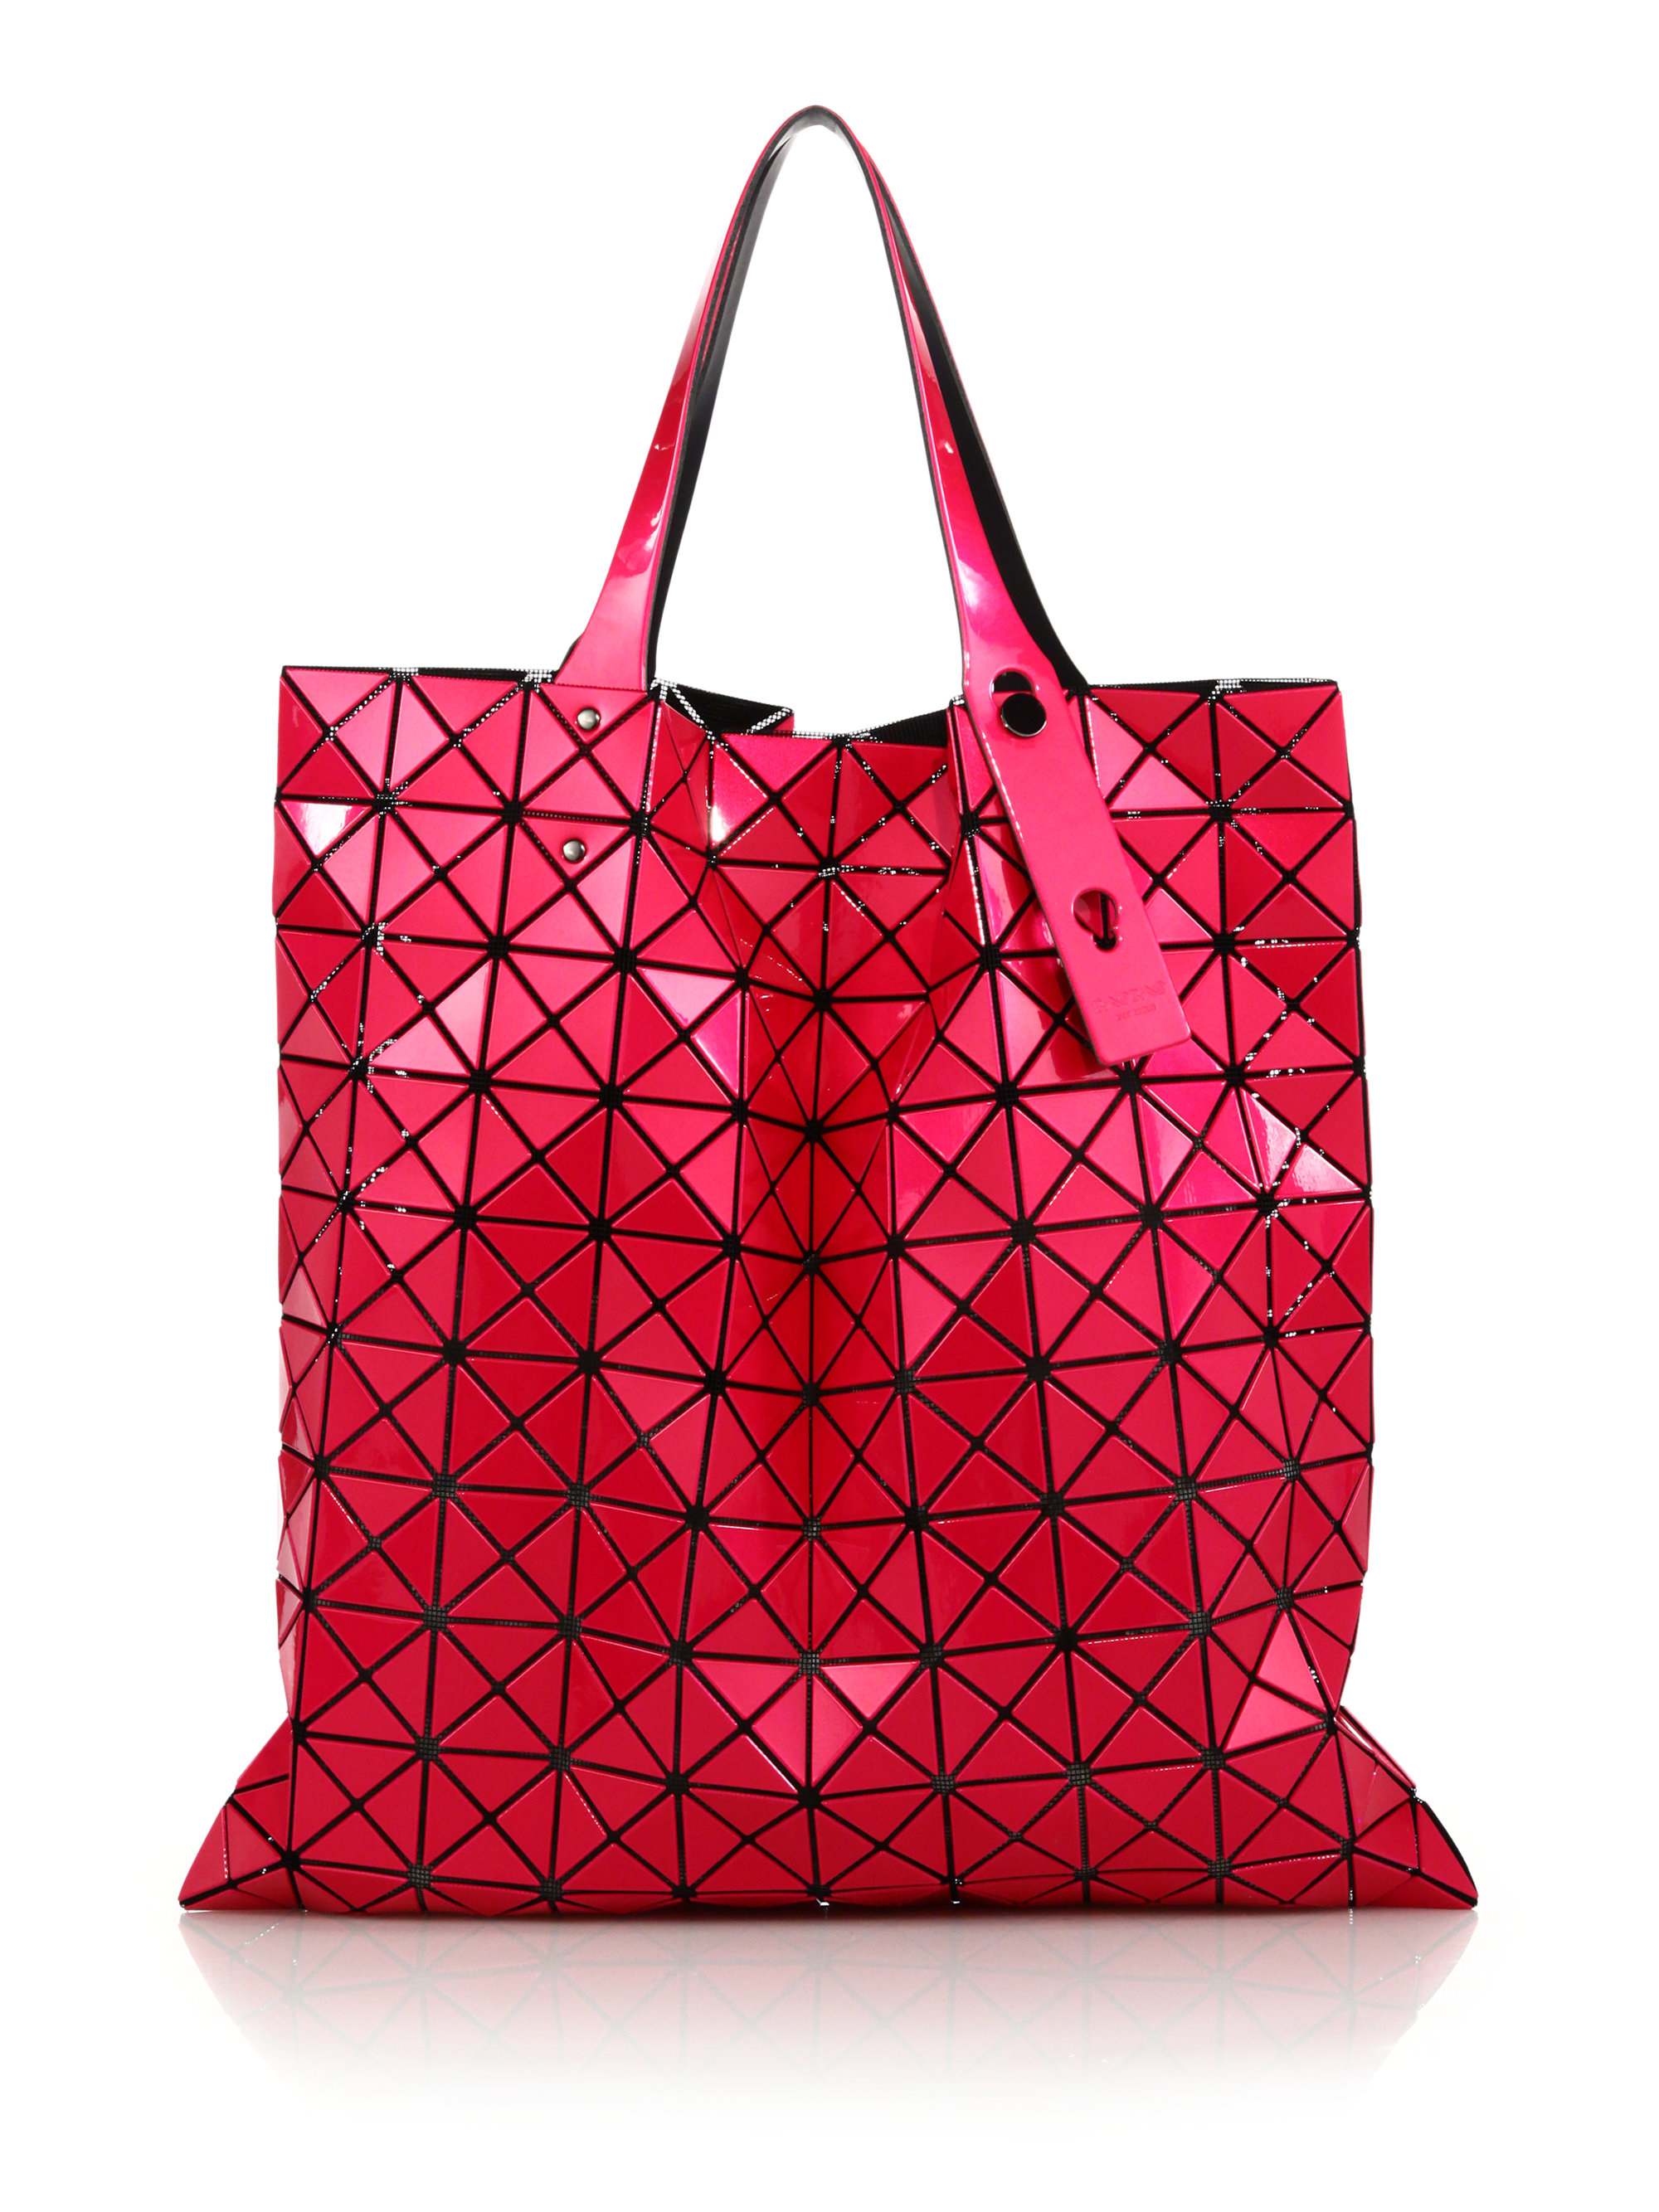 Bao bao issey miyake Prism Basic Metallic Faux Leather Tote in Red ...